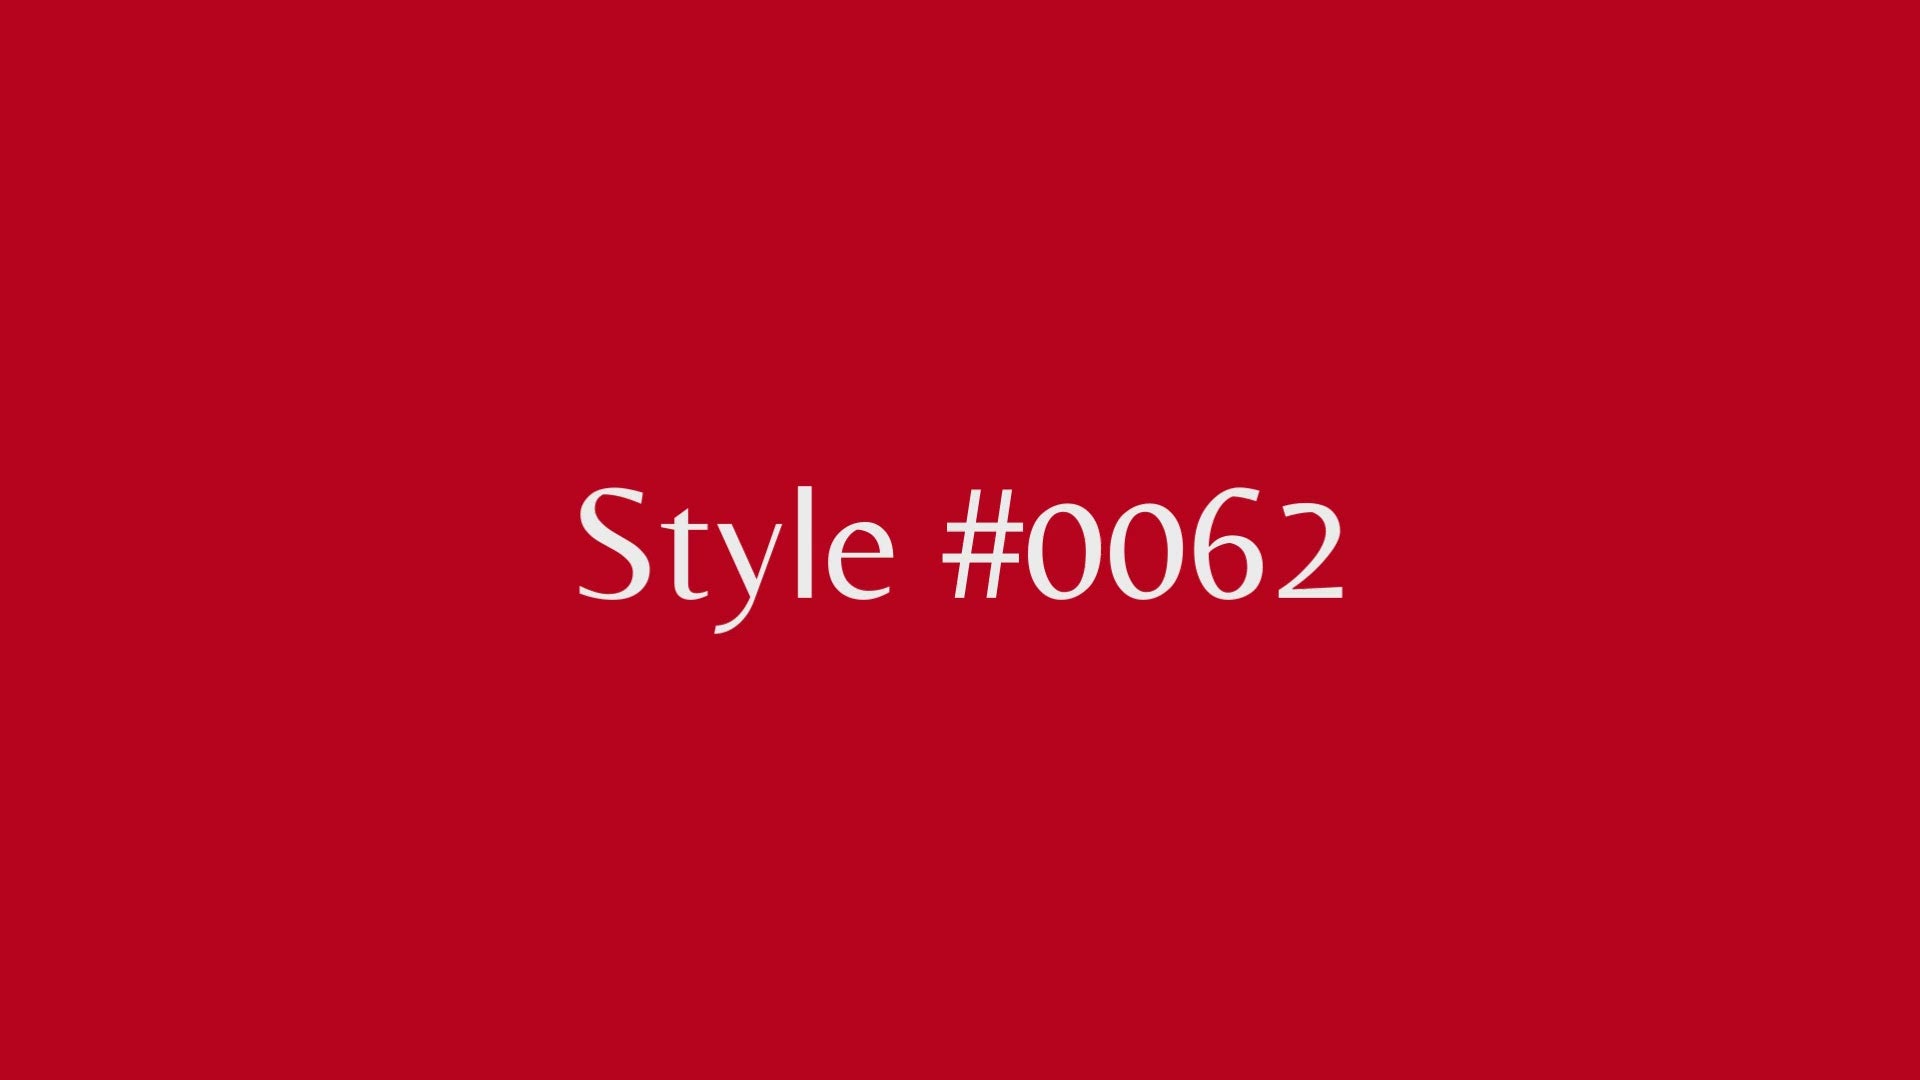 Demonstrative video of style #0062